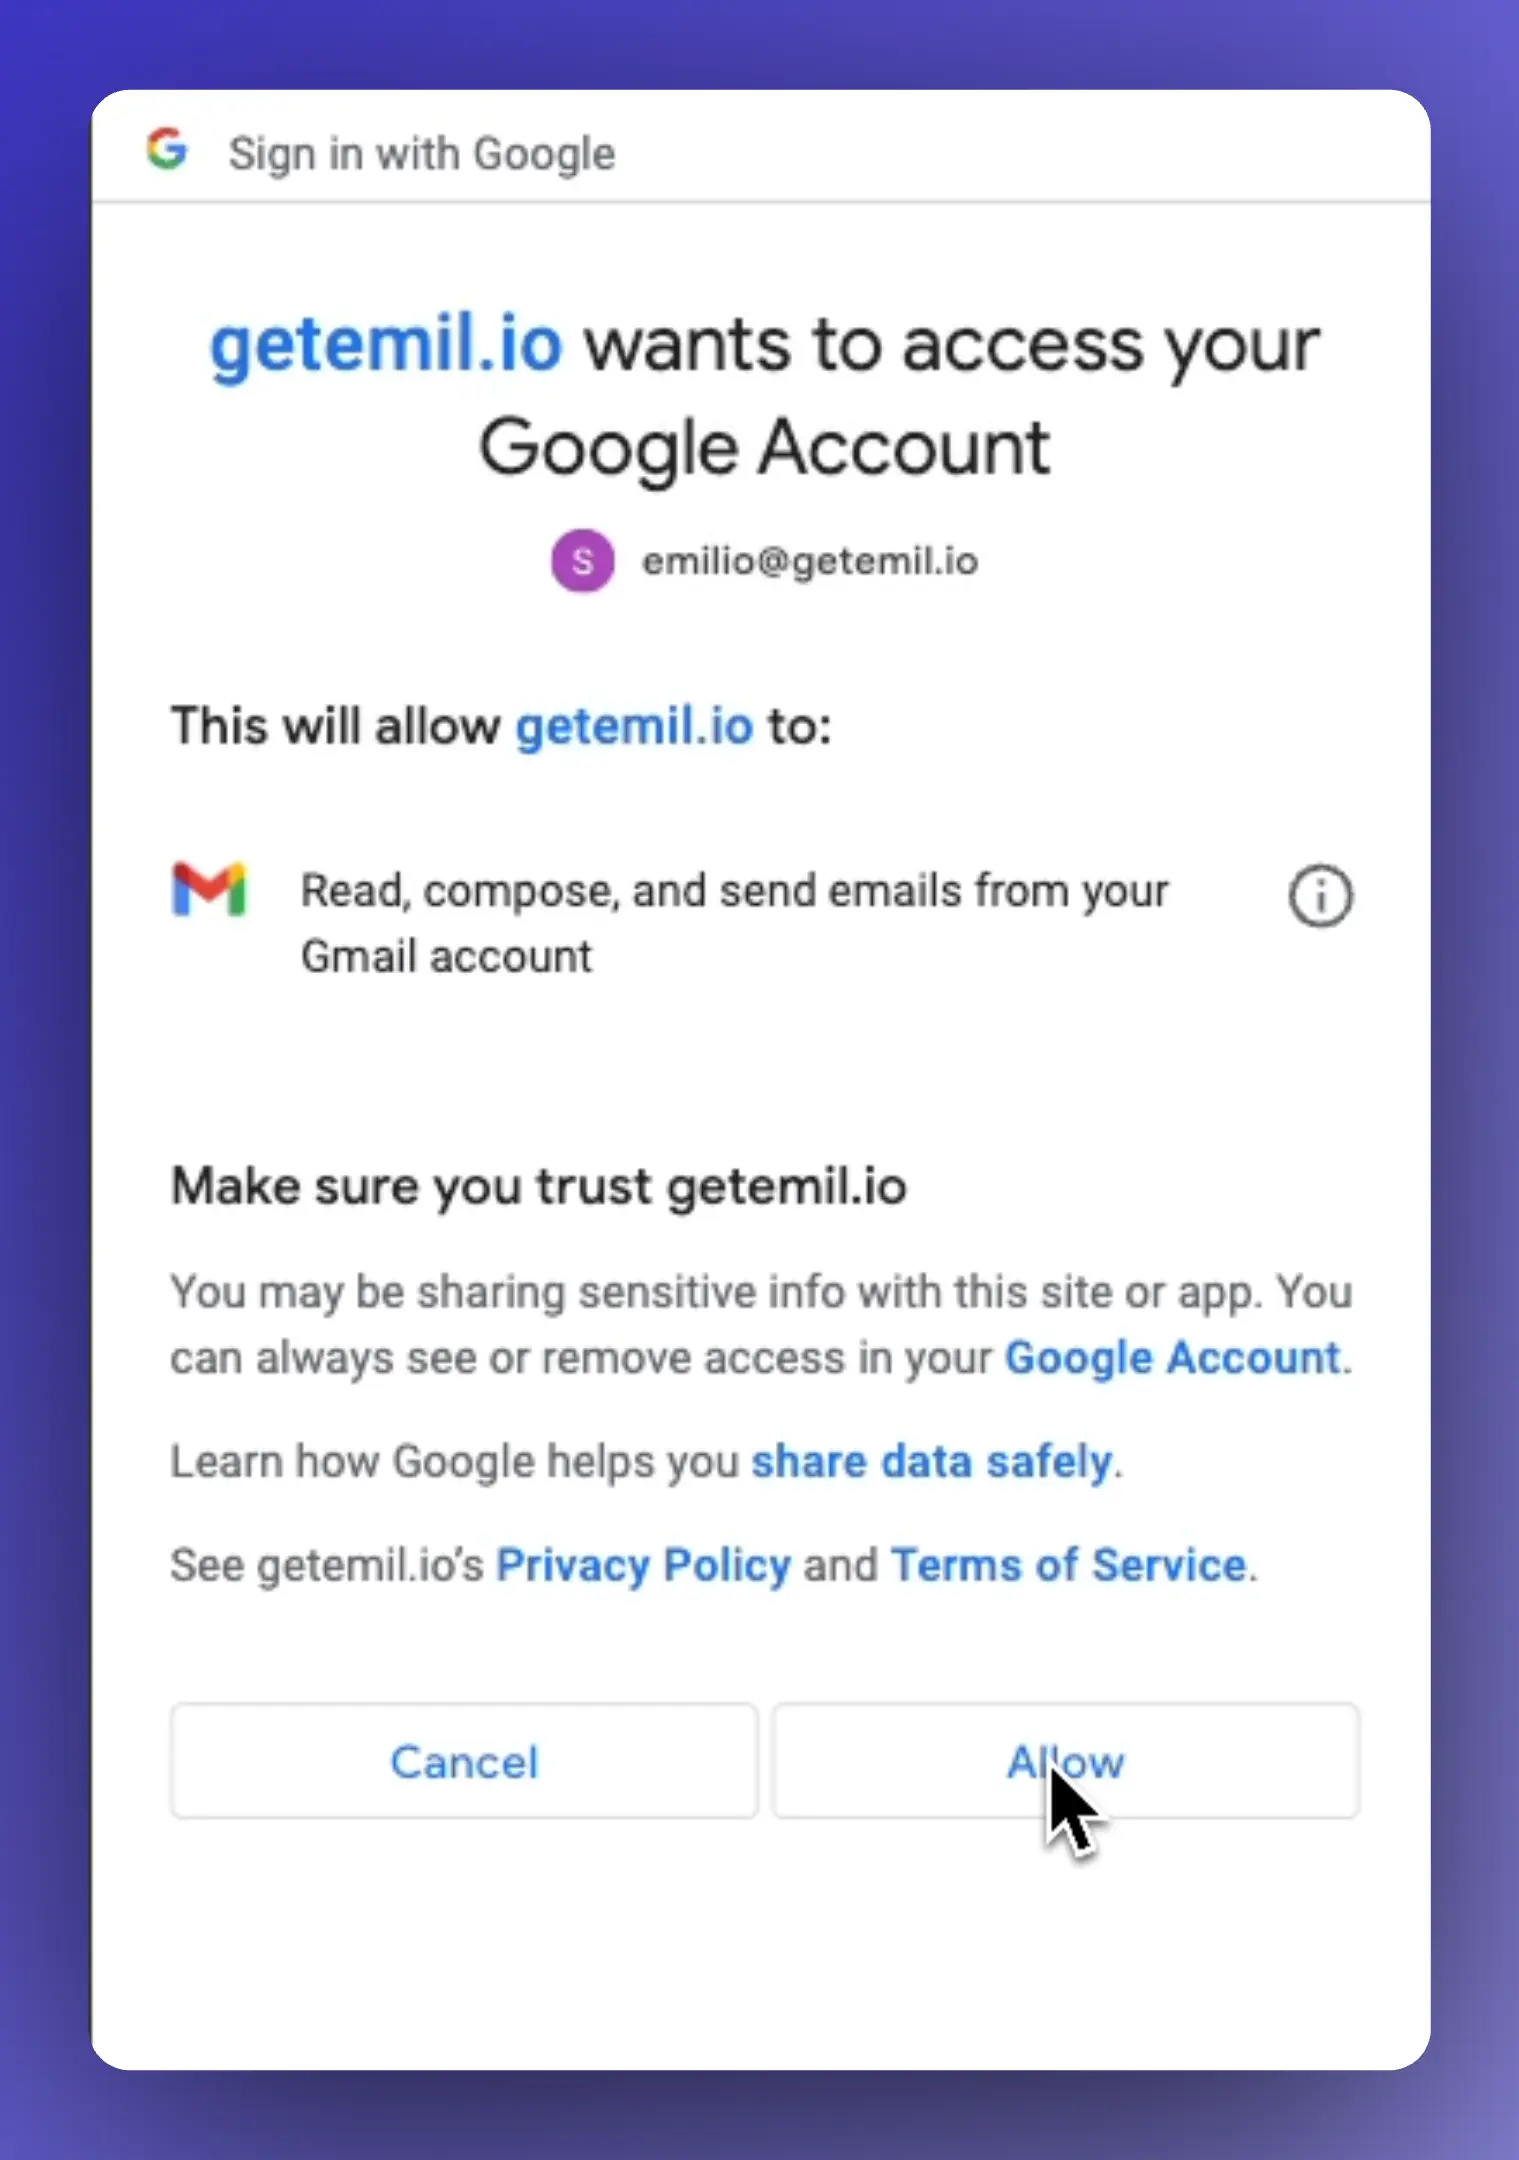 No installation needed, just sign in to your Gmail account